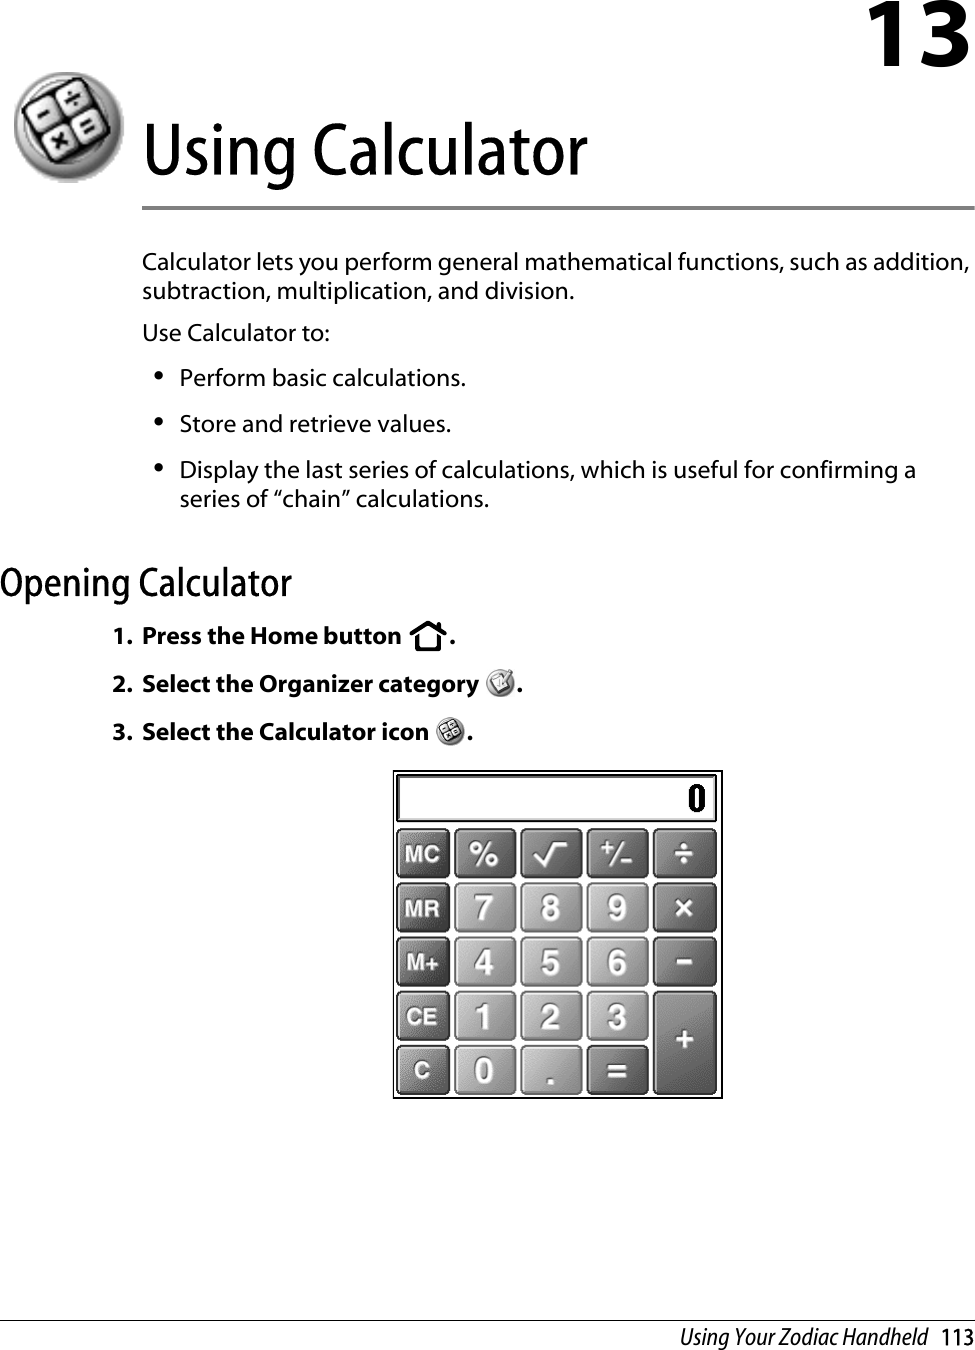 Using Your Zodiac Handheld   11313Using CalculatorCalculator lets you perform general mathematical functions, such as addition, subtraction, multiplication, and division. Use Calculator to: •Perform basic calculations.•Store and retrieve values.•Display the last series of calculations, which is useful for confirming a series of “chain” calculations.Opening Calculator1. Press the Home button  . 2. Select the Organizer category  .3. Select the Calculator icon  .